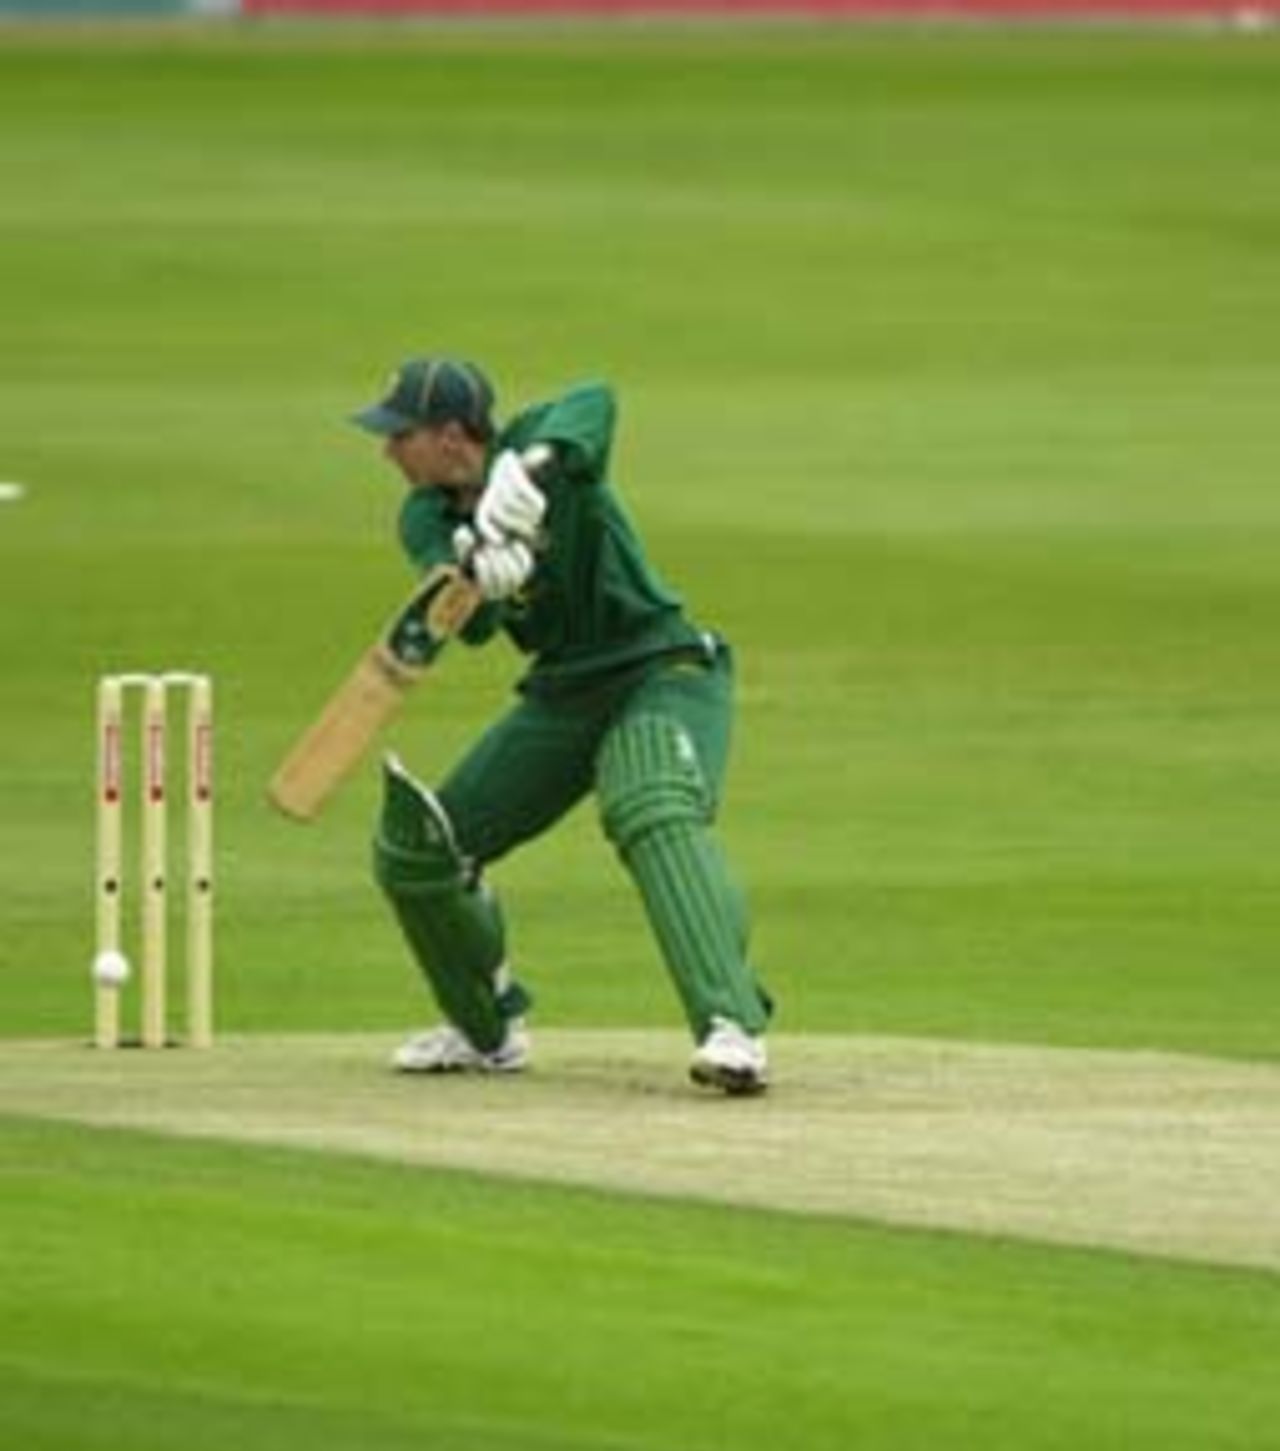 In the second ODI played at Trent Bridge, 2000